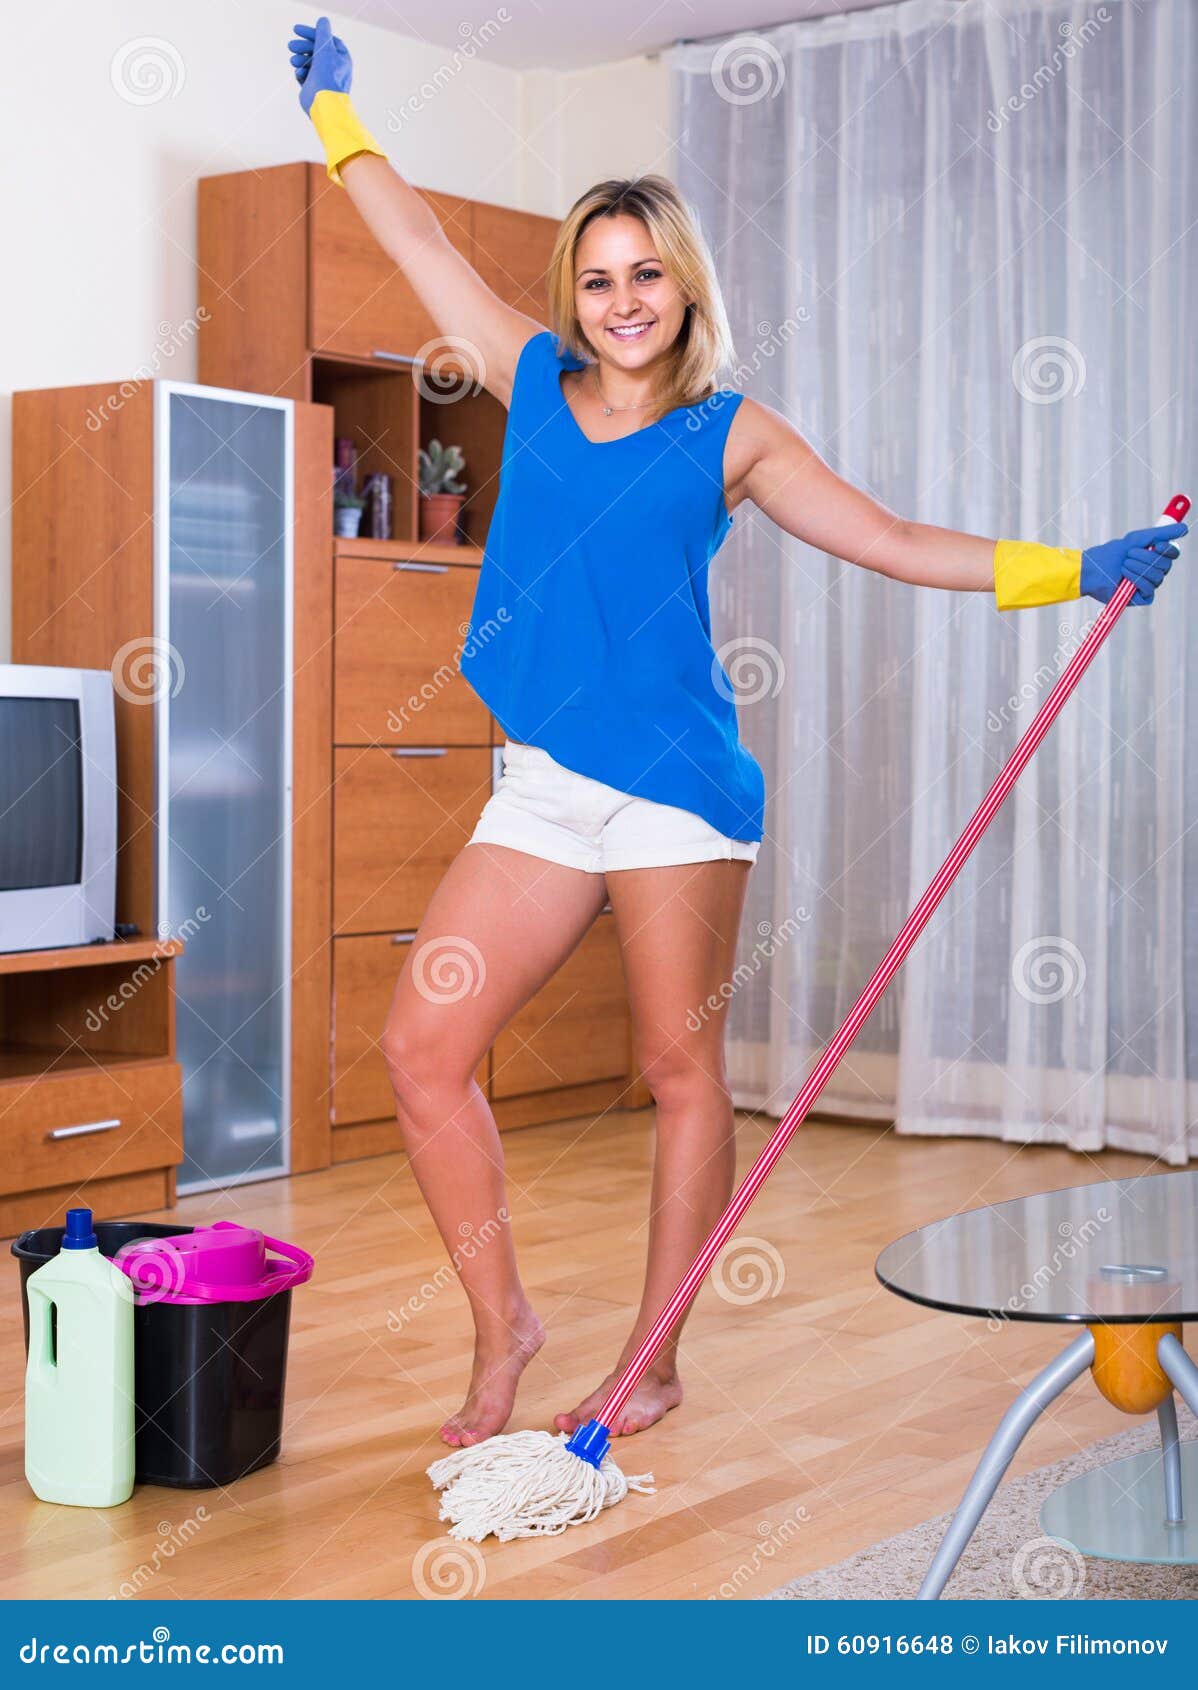 Housewife Smiling And Doing Floor Cleaning I